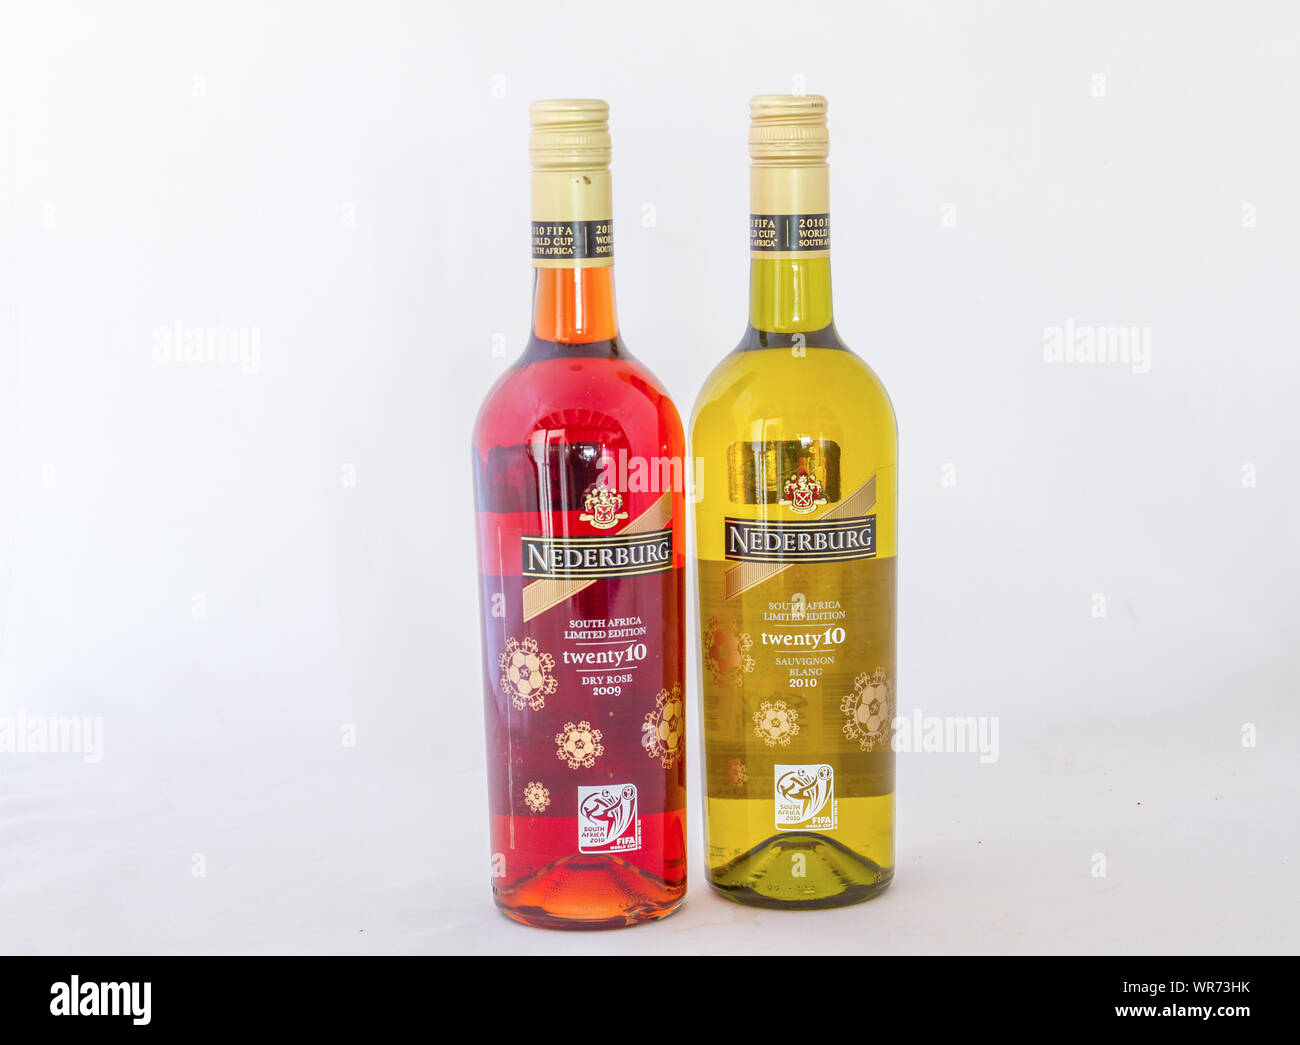 Johannesburg, South Africa - Bottles of Nederburg wine produced for the FIFA soccer world cup in the country in 2010 isolated on a white background Stock Photo